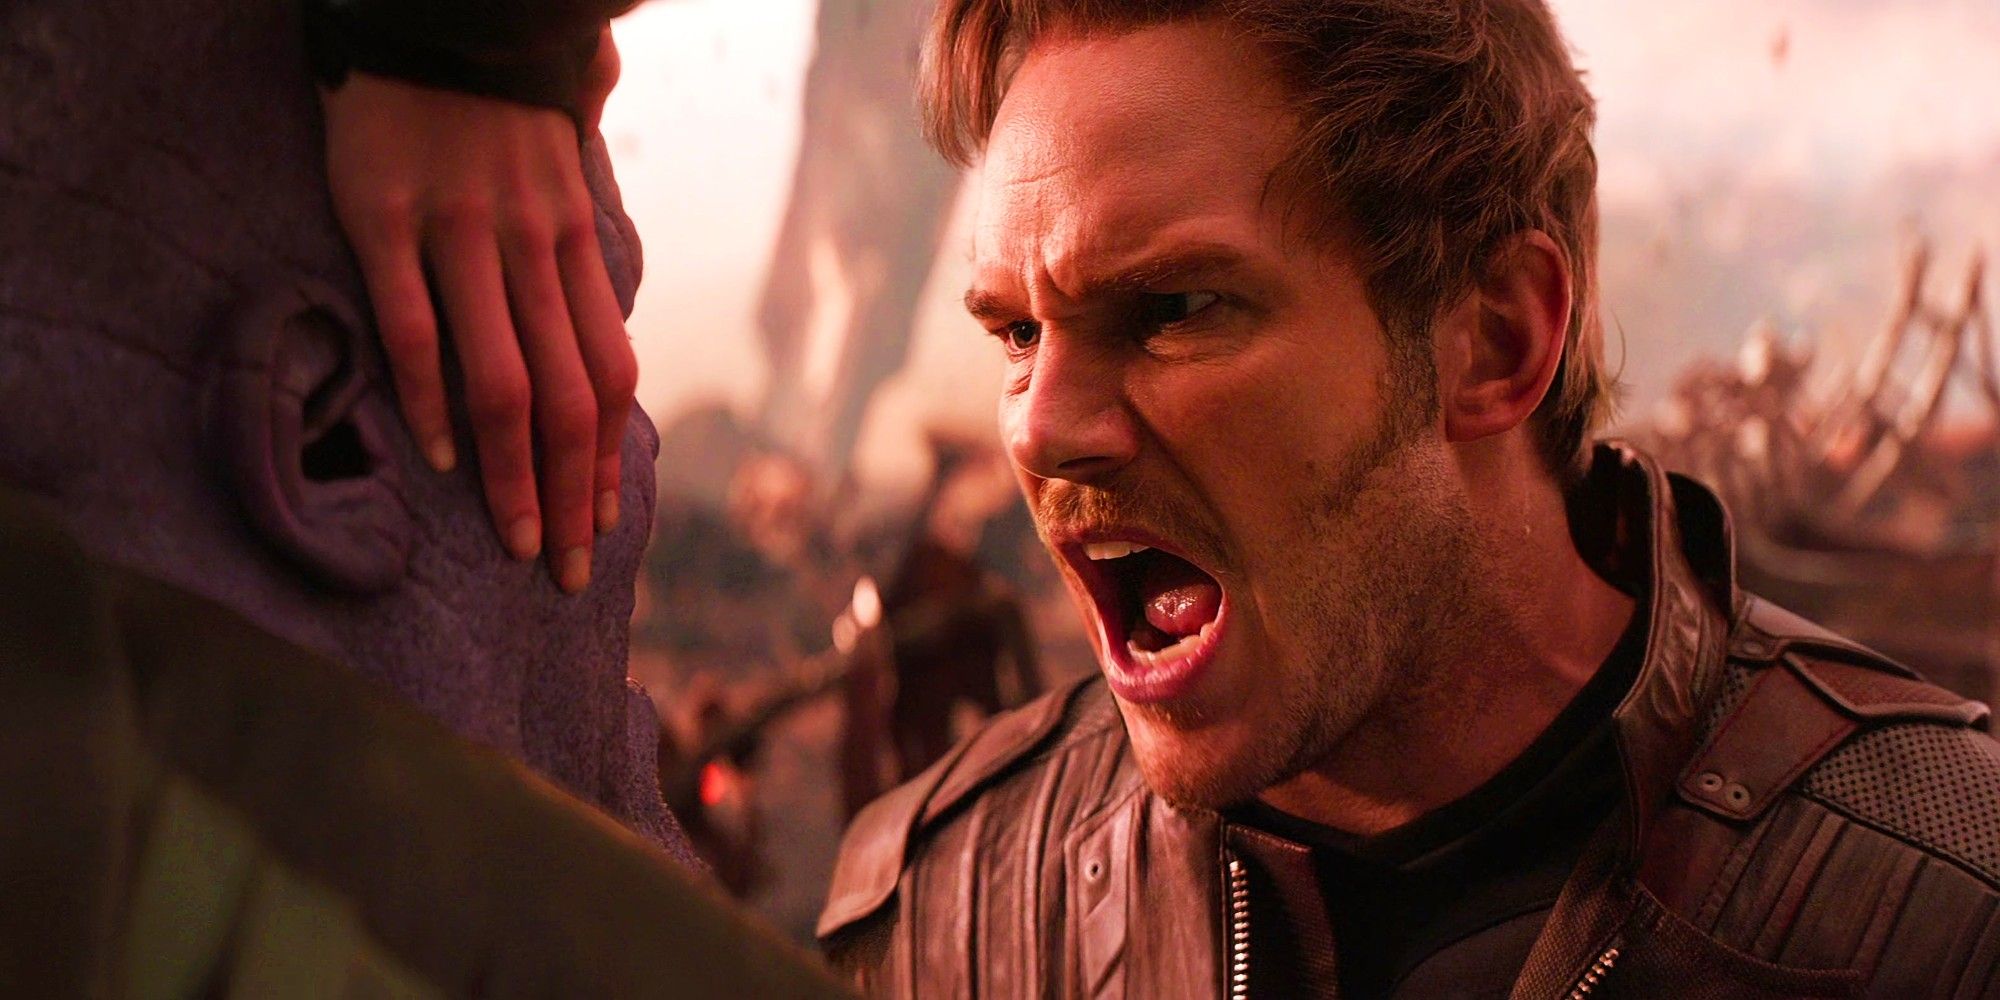 Chris Pratt as Star-Lord yelling at Thanos in Avengers Infinity War